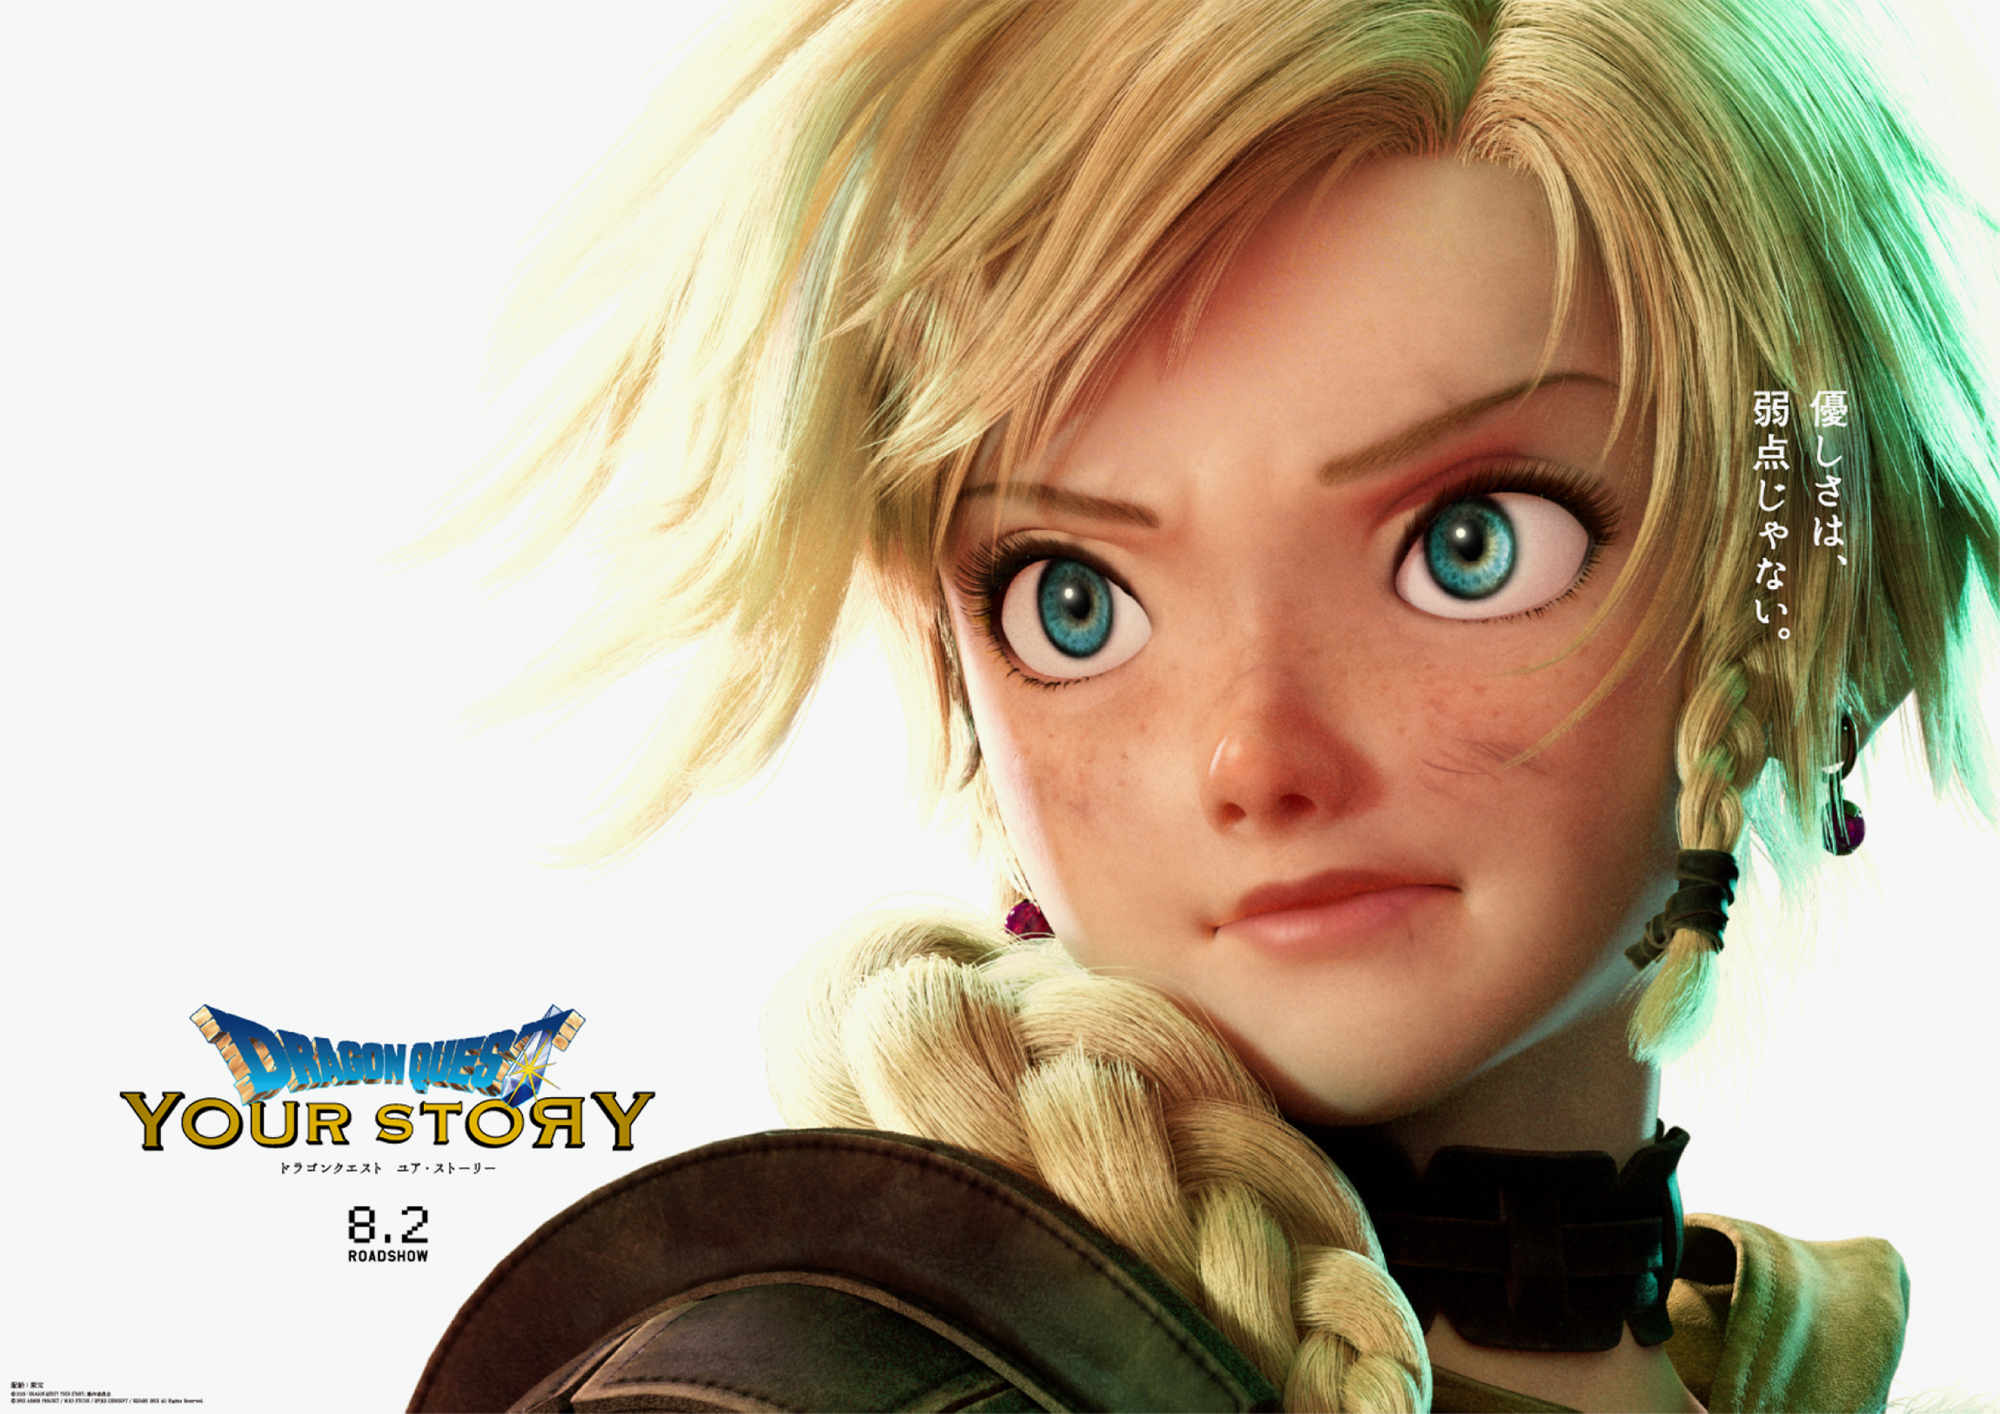 Dragon Quest: Your Story – Análise